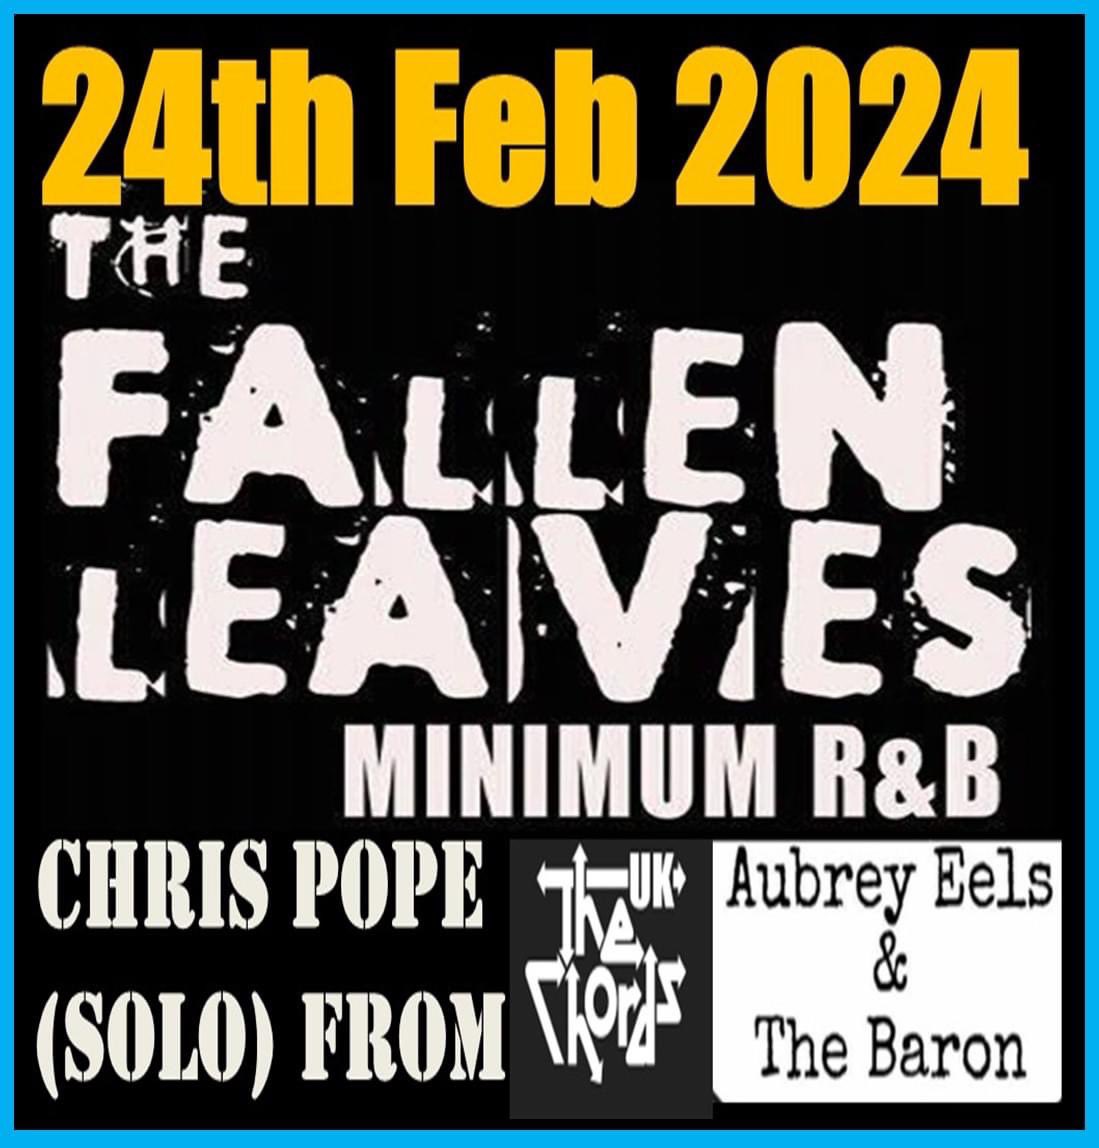 Solo slot on 24th with the Fab ‘ Fallen Leaves’ x